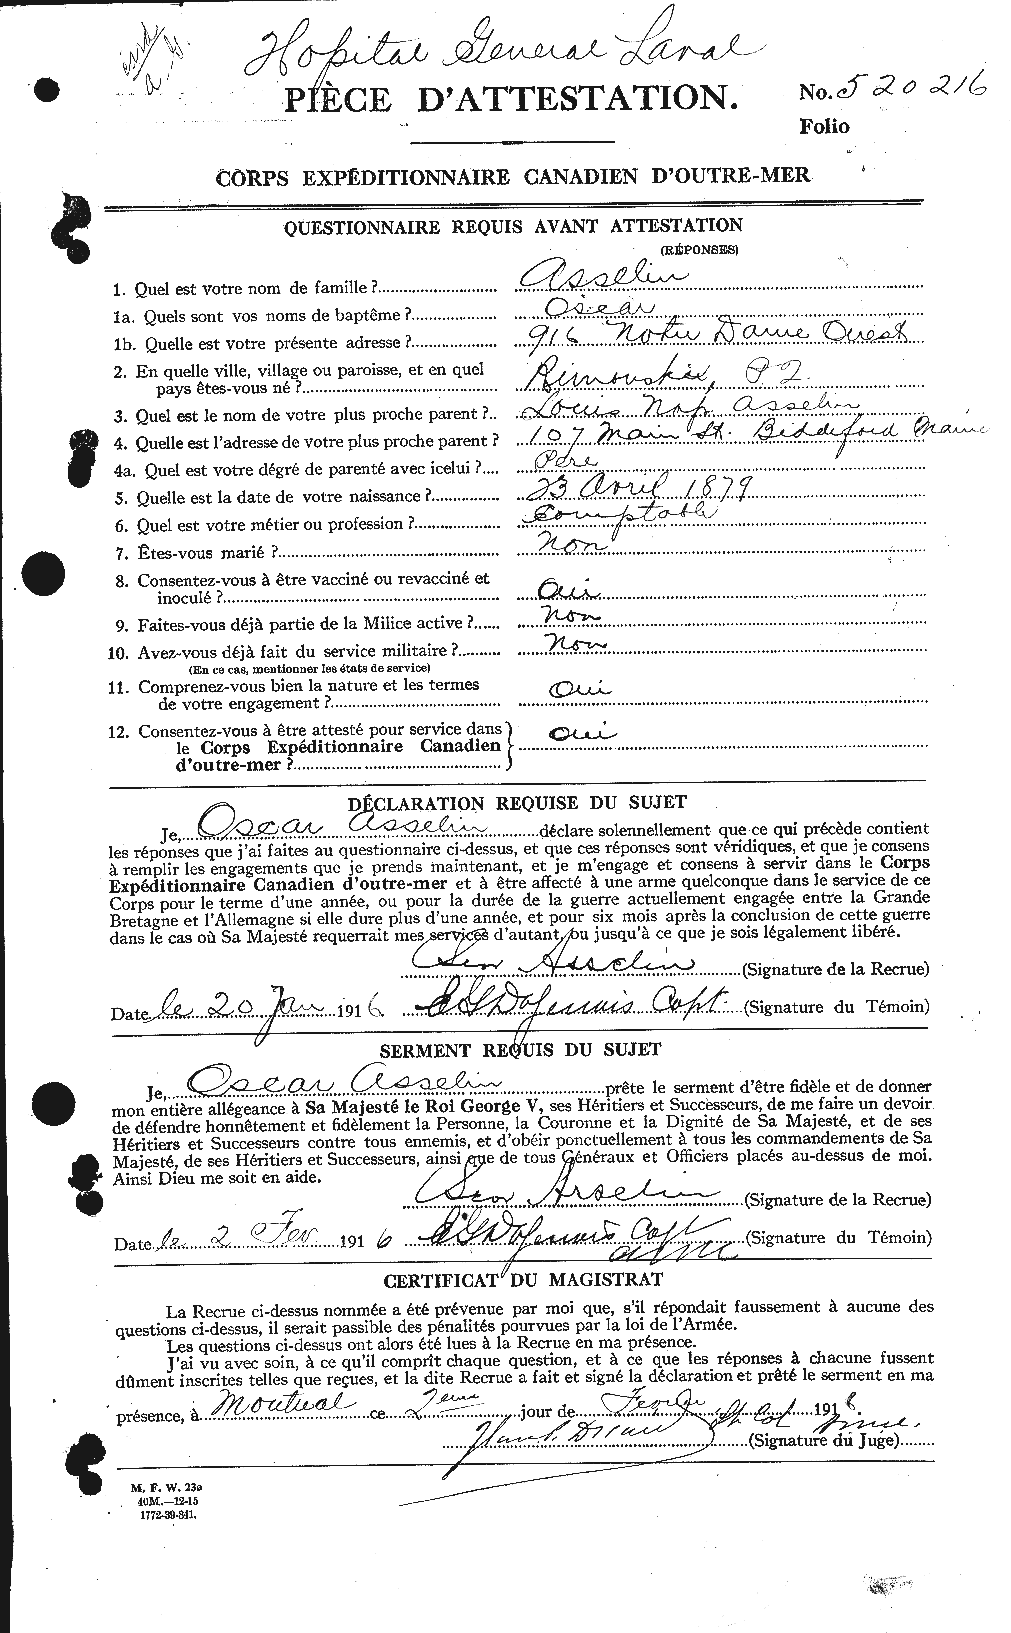 Personnel Records of the First World War - CEF 223474a